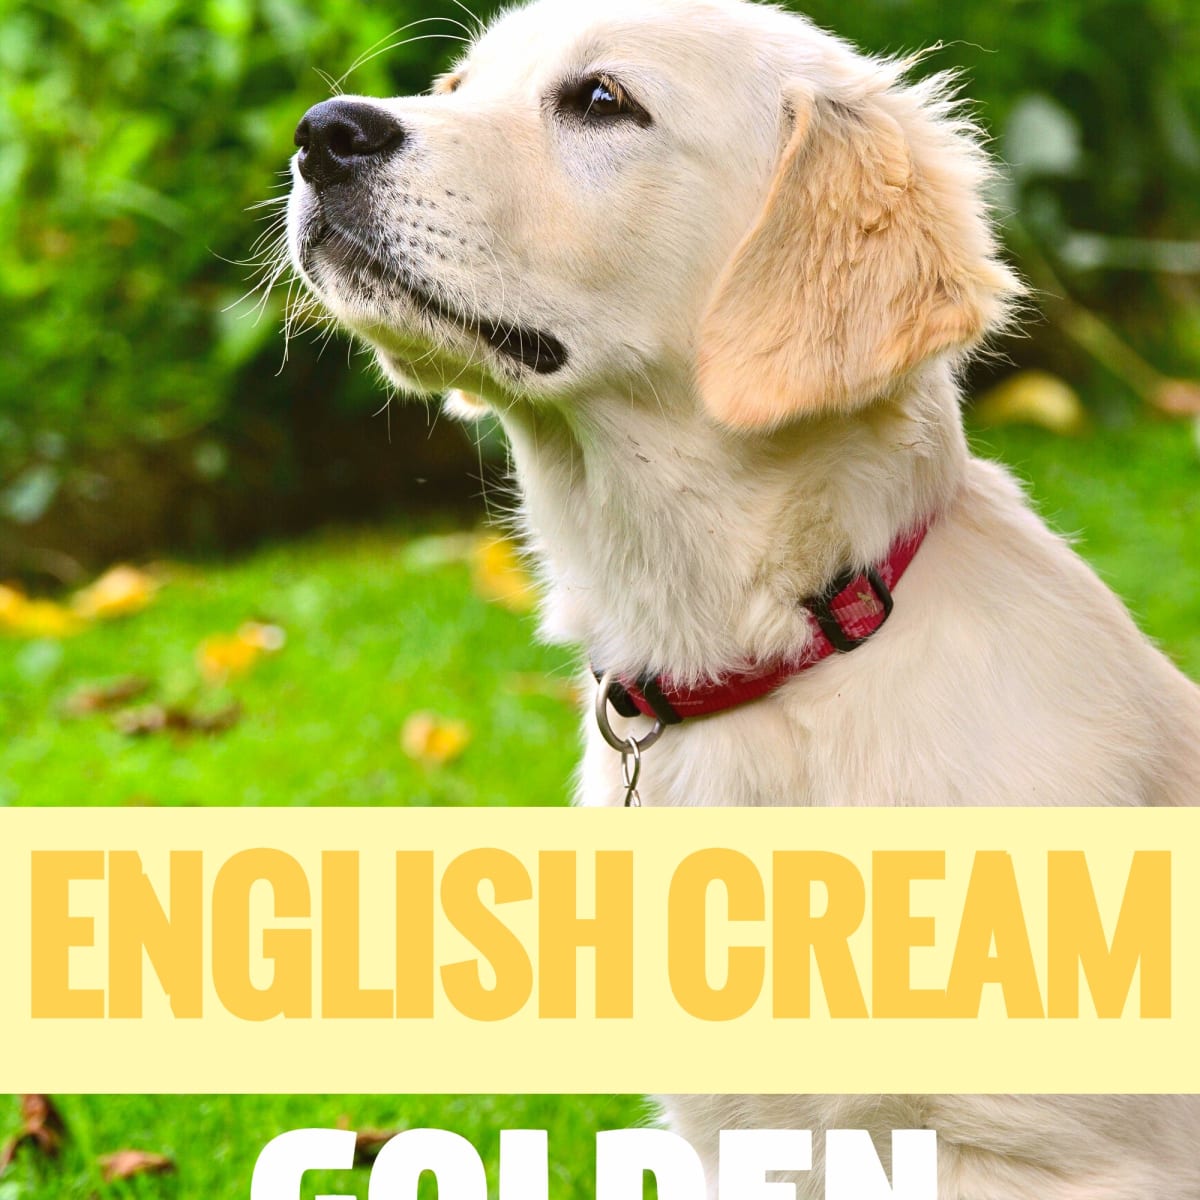 The Truth About English Cream White Golden Retrievers Pethelpful By Fellow Animal Lovers And Experts